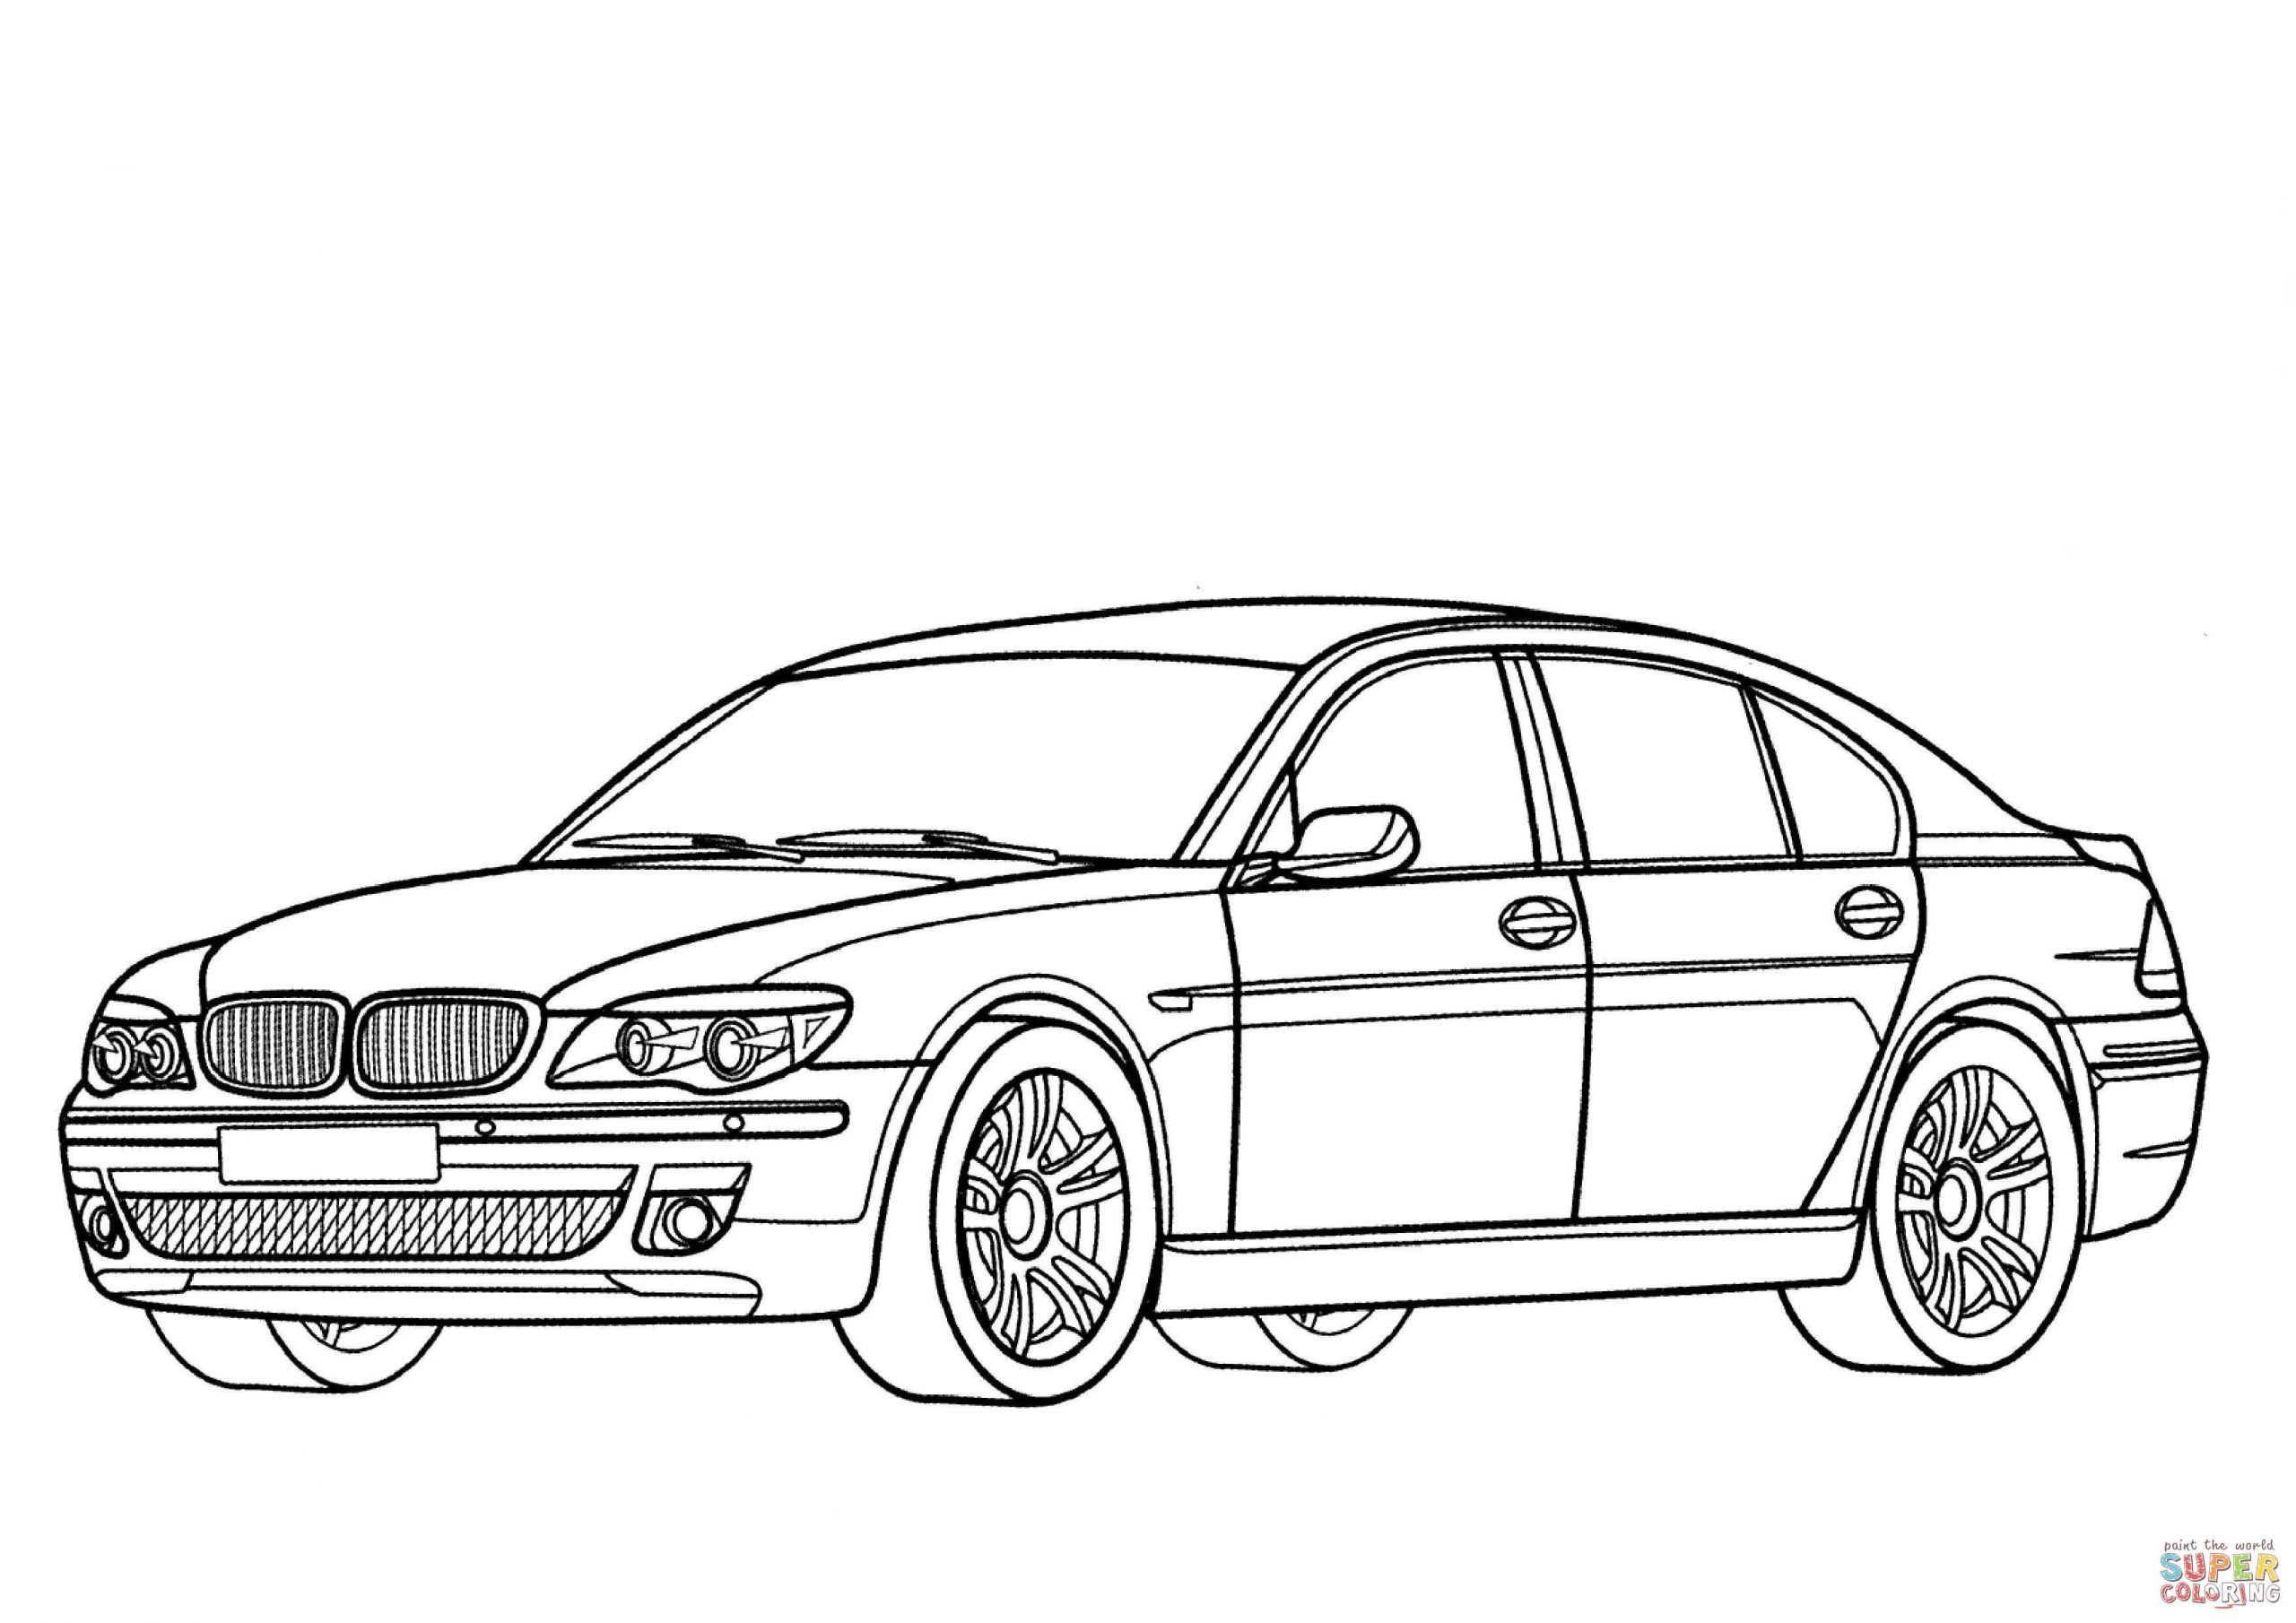 Bmw 7 Series Coloring Page | Free Printable Coloring Pages concernant Vouiture Coloring